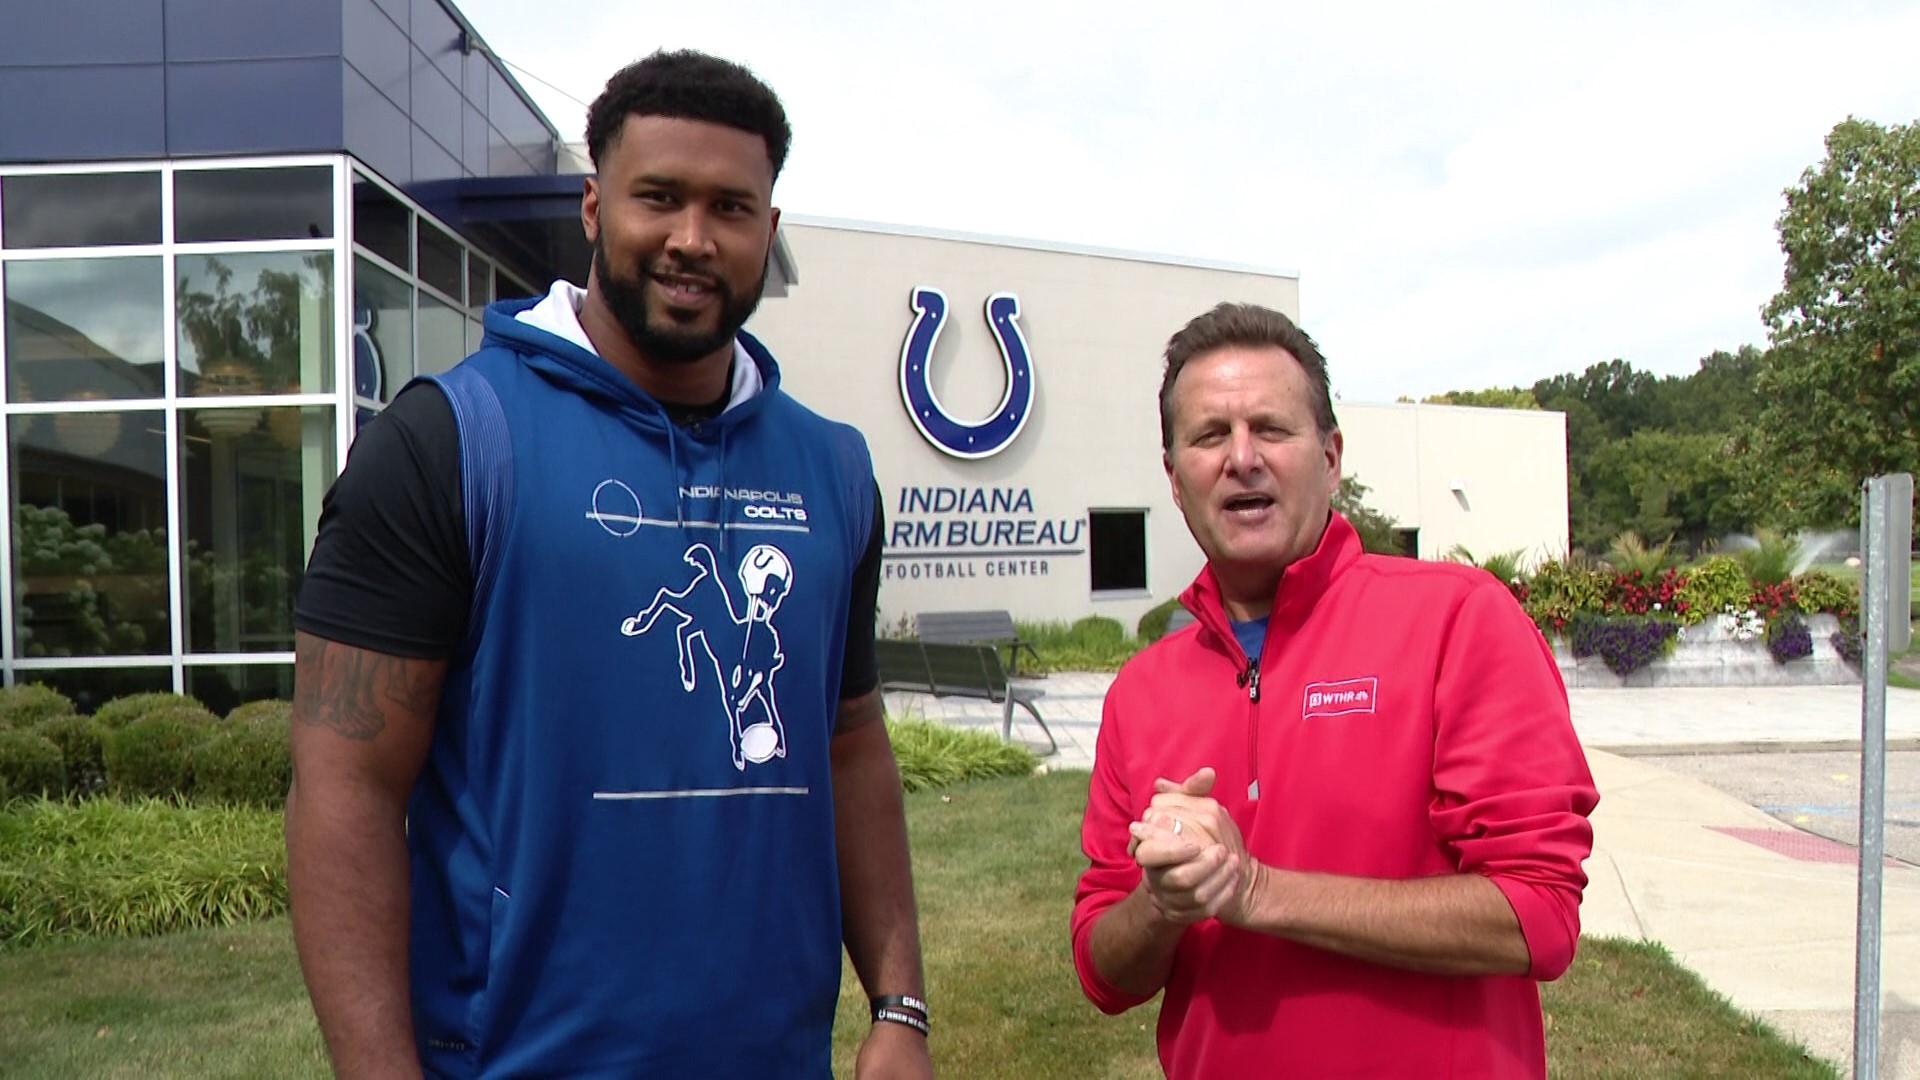 13Sports director Dave Calabro and Indianapolis Colts defensive end DeForest Buckner chat and preview the Colts upcoming game against the Rams.